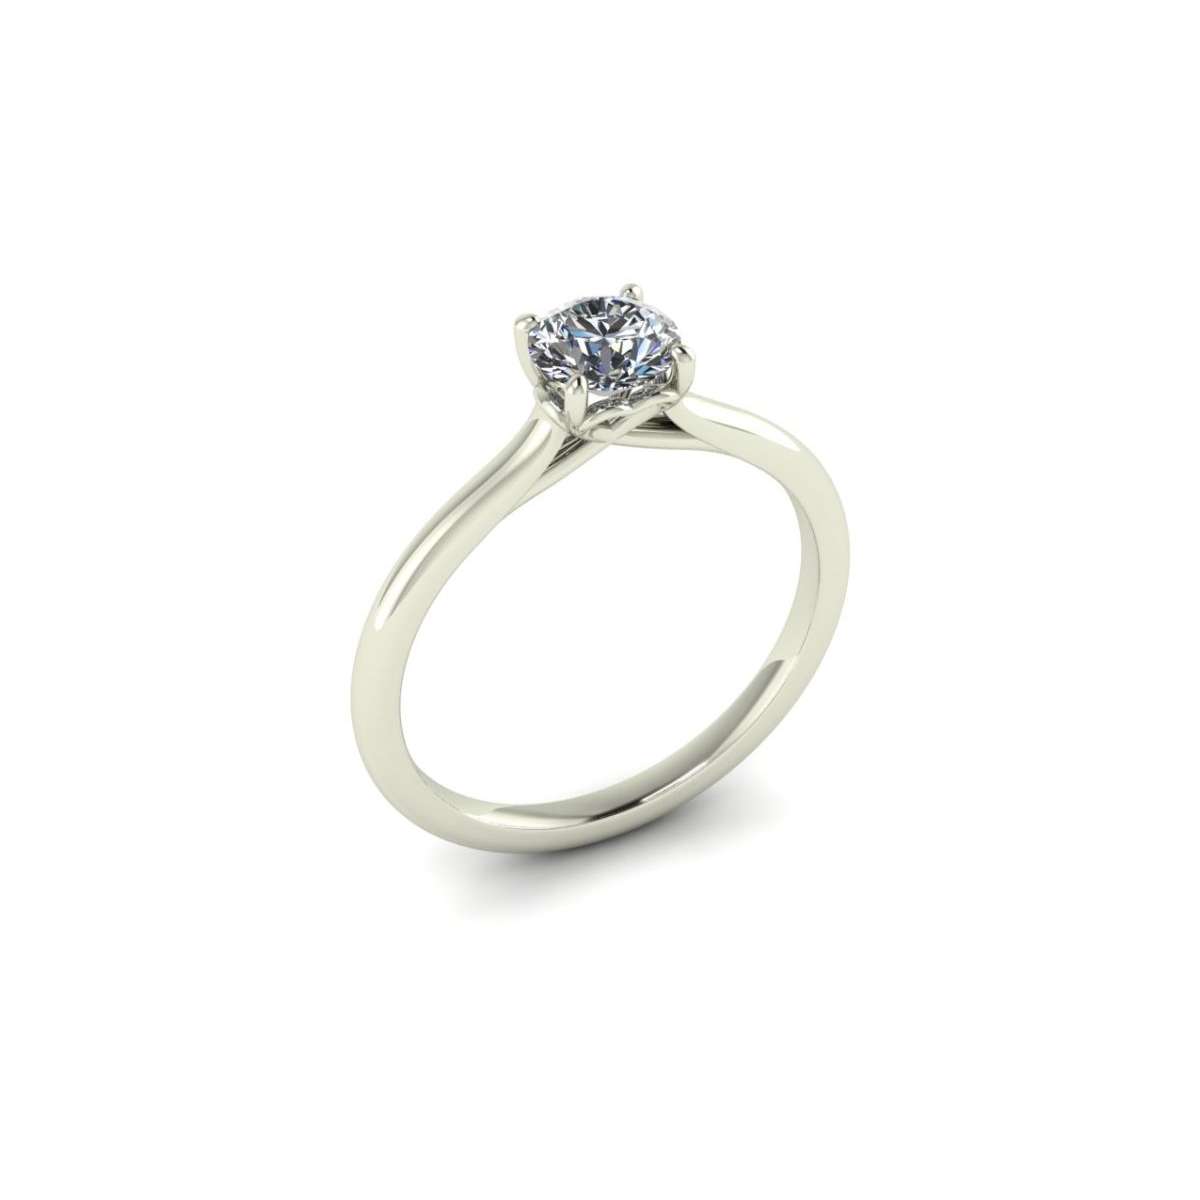 Women's solitaire ring made of white gold with heart-shaped decorations diamond certificate gia carati 0.62 G-IF